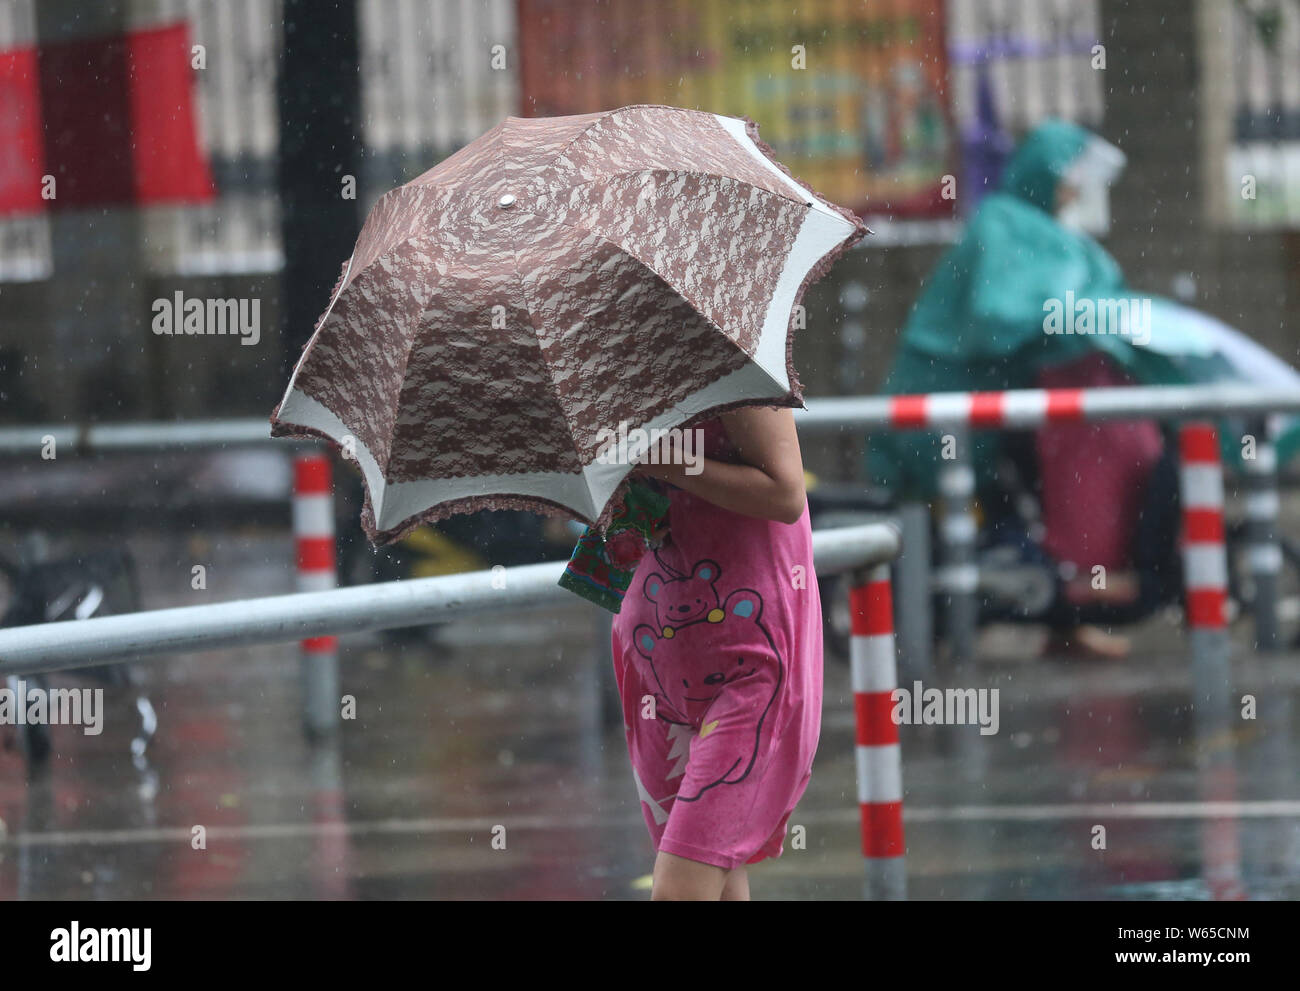 A pedestrian shielding herself with an umbrella braves strong wind and heavy downpour caused by Typhoon Rumbia, the 18th typhoon of the year, in Nanto Stock Photo